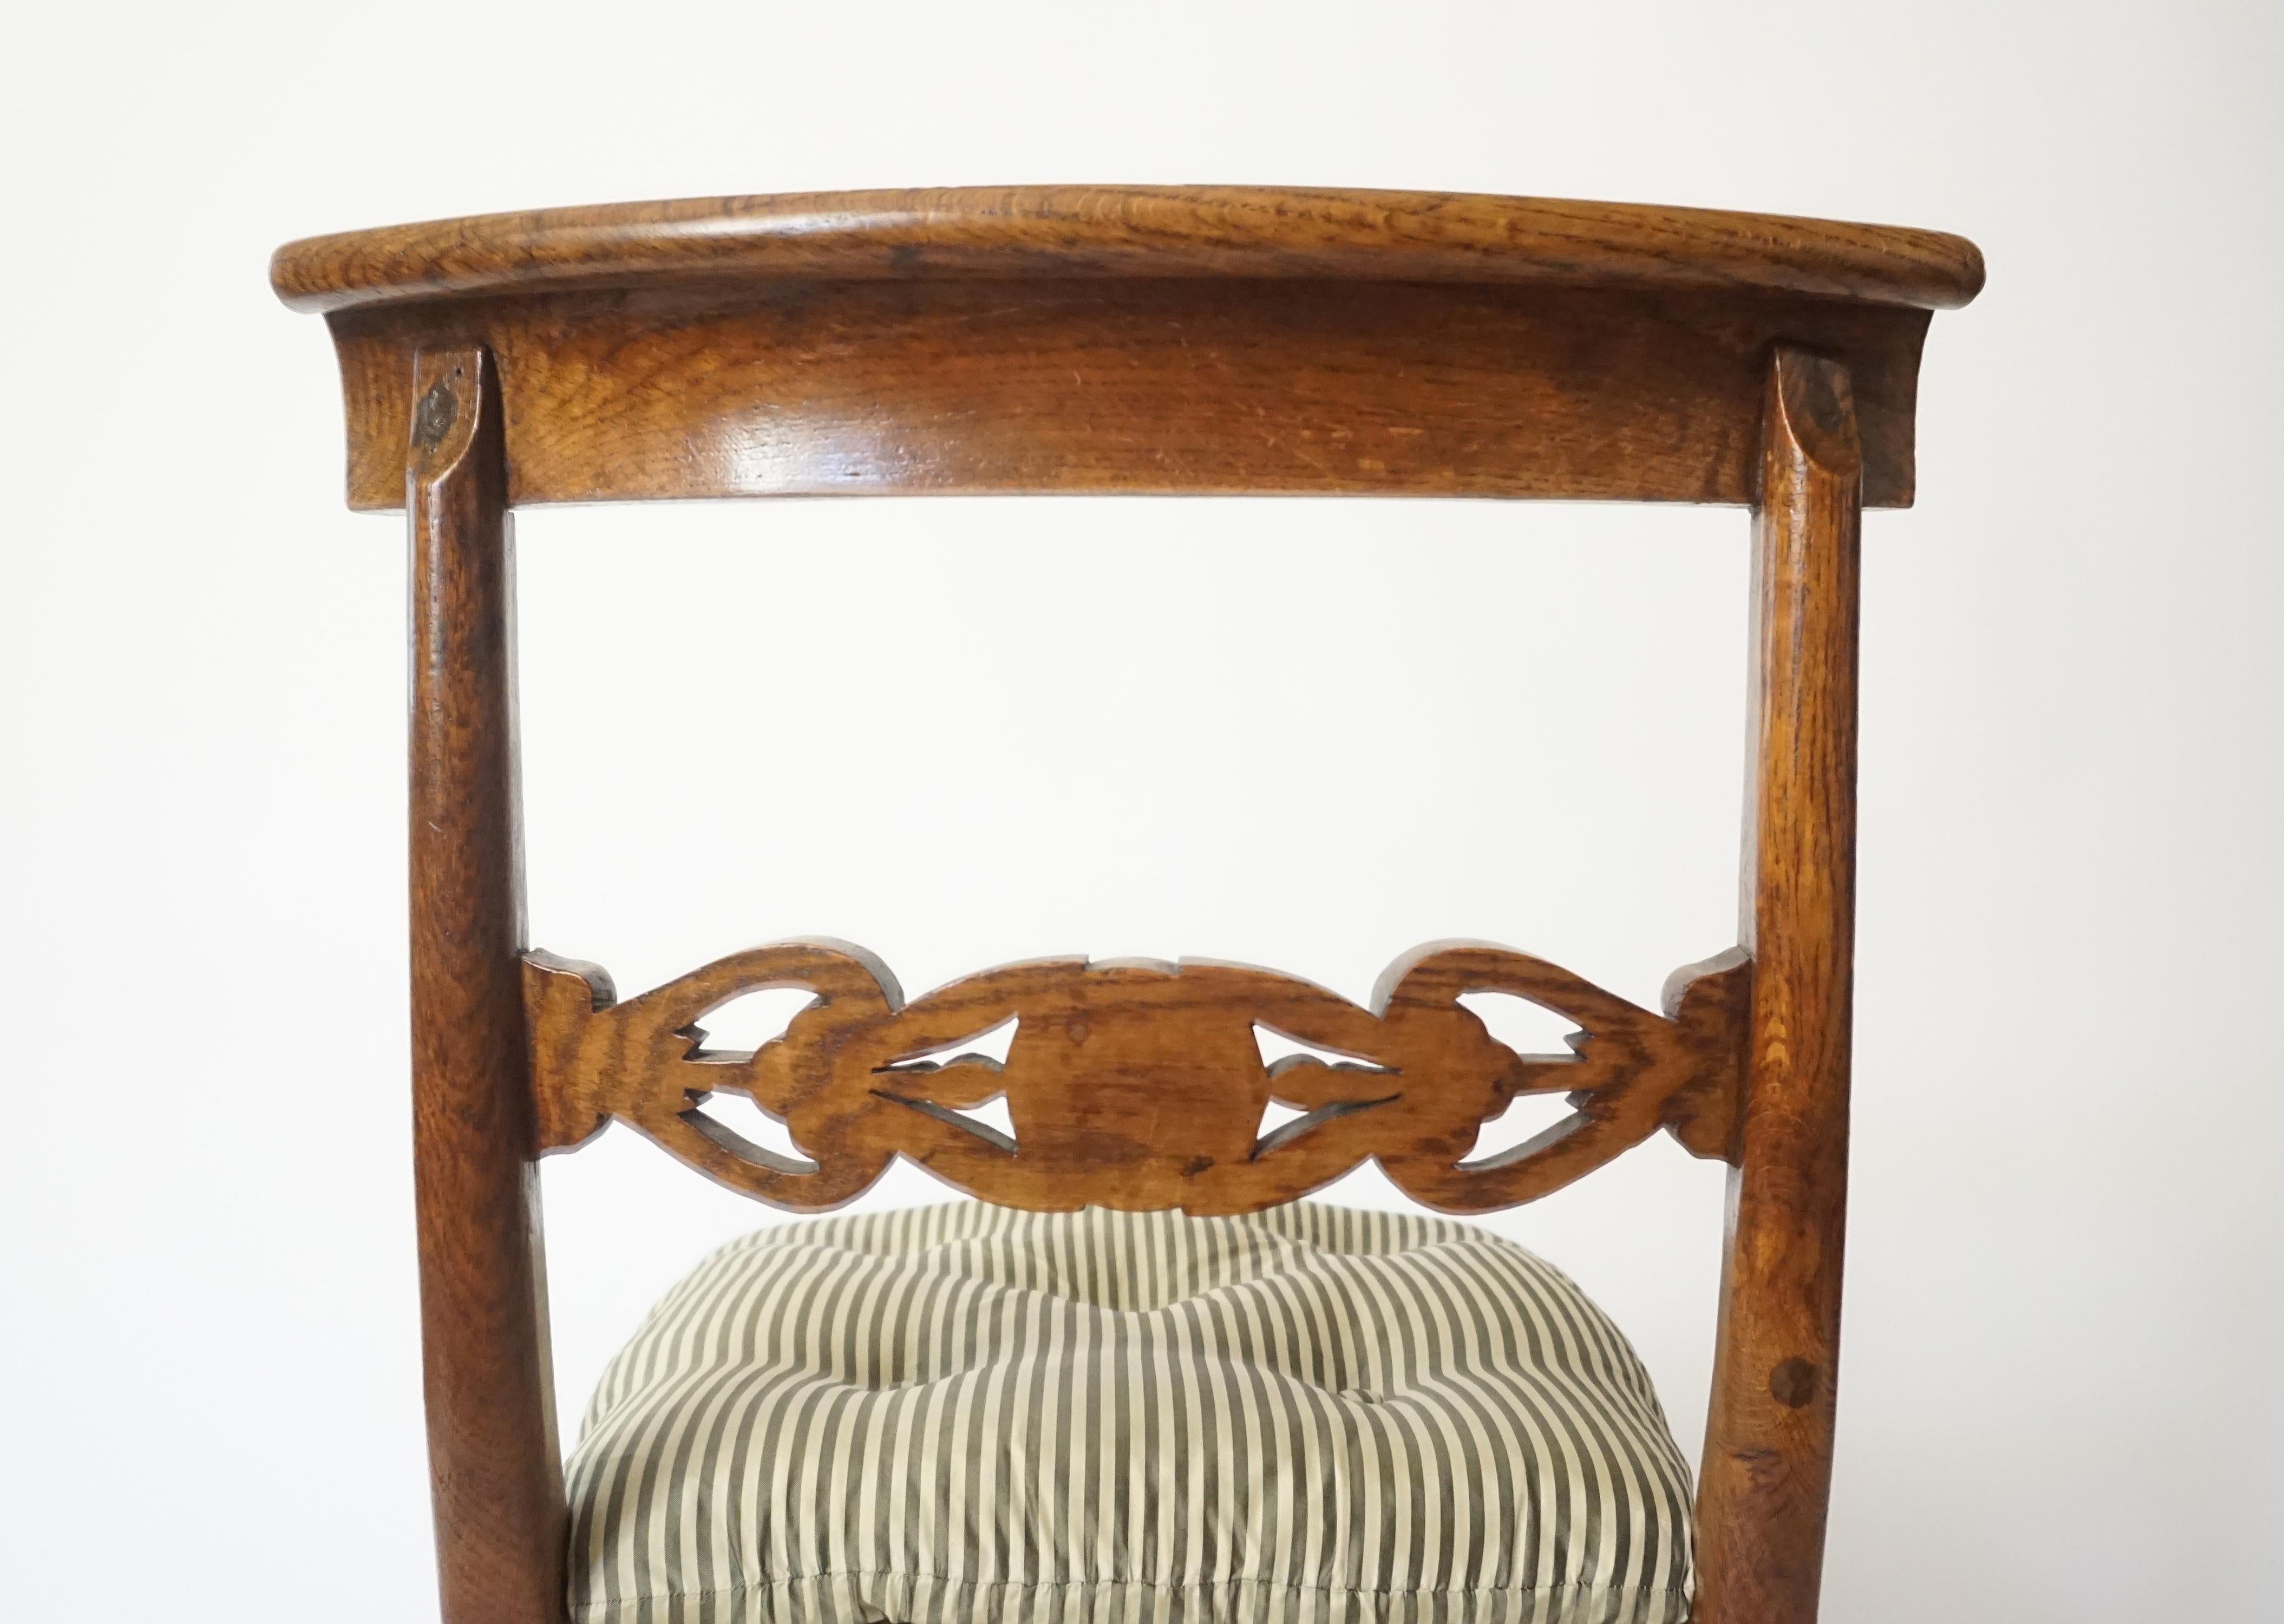 Ebony Chairs by George Bullock, Set of 4, England, 1816